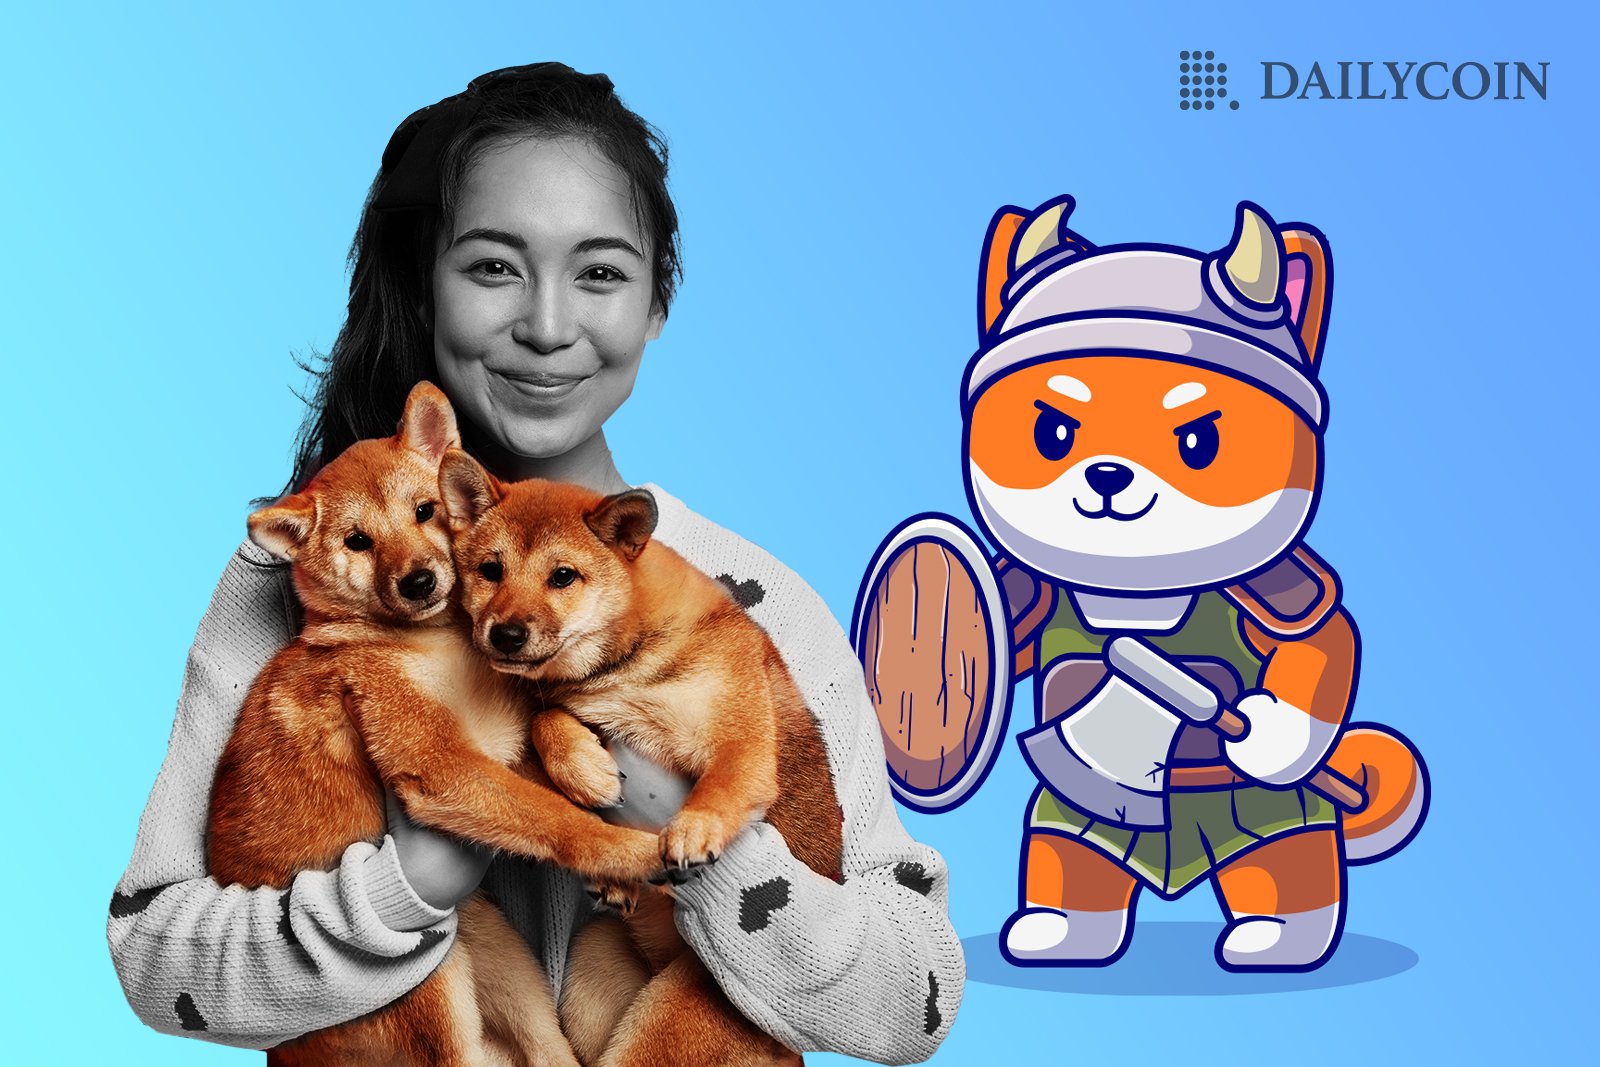 A girl is holding two Shiba Inu puppies, while Floki cartoon dog stands aside and wants to join the fun.